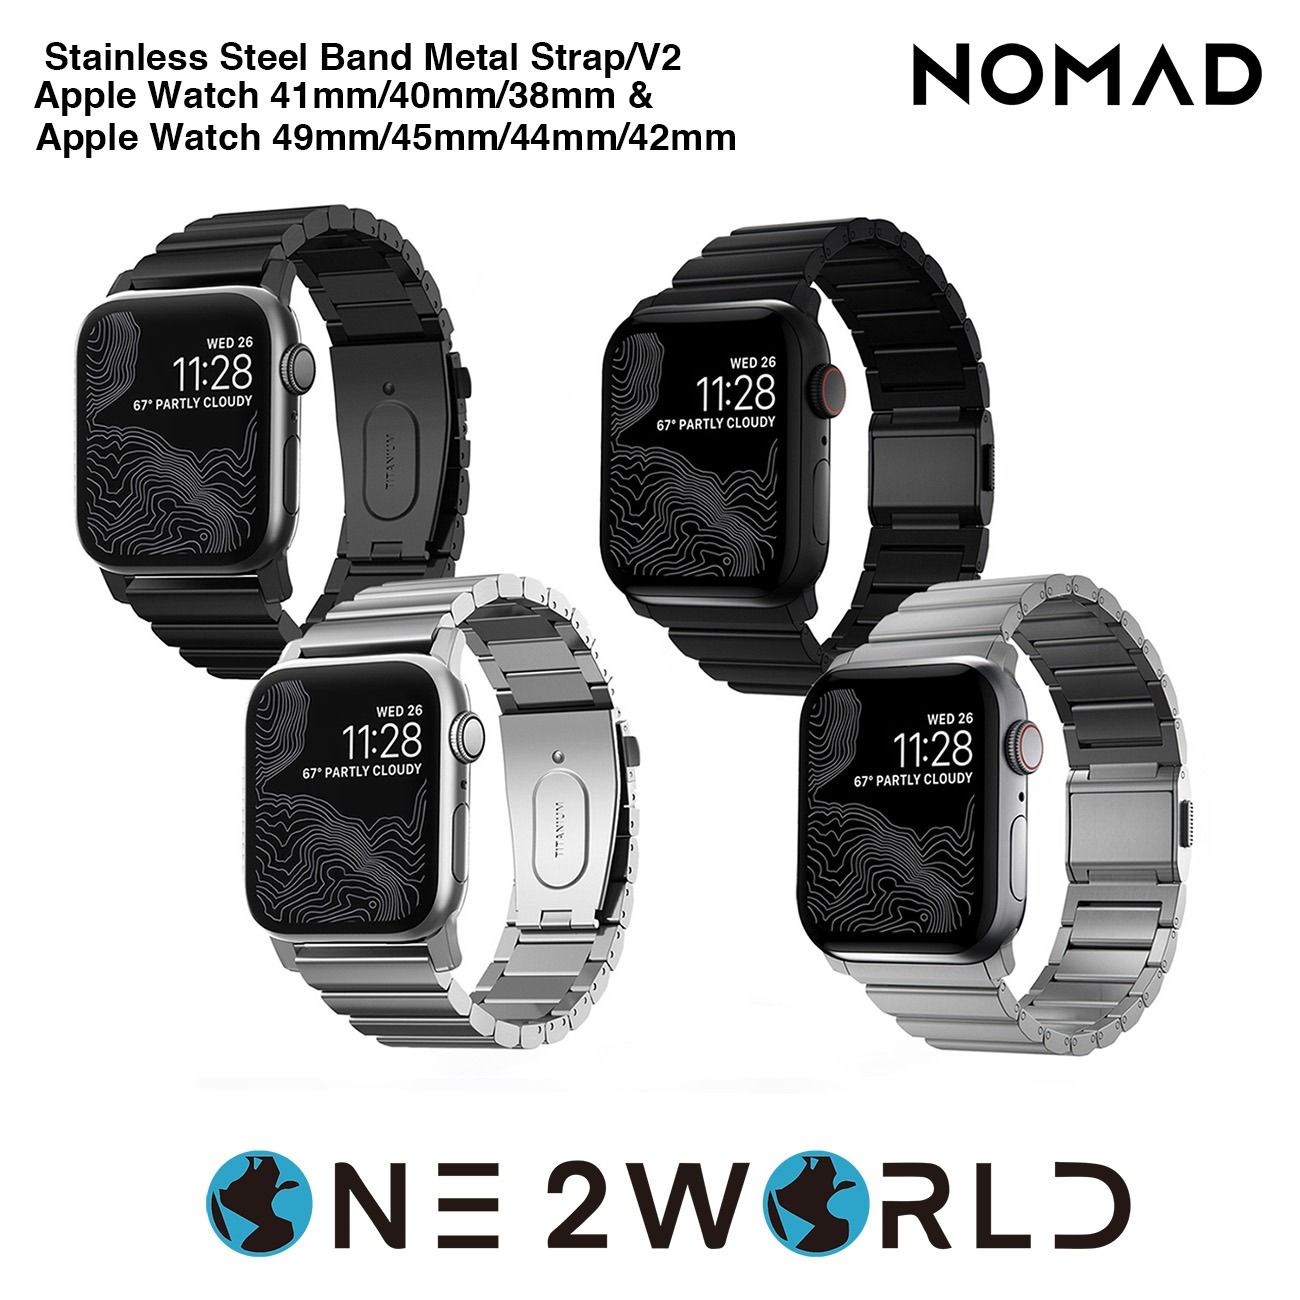 NOMAD Titanium Band Metal Strap Watches Carousell Wearables | & Mobile Watch | for Smart 41mm/40mm/38mm 49mm/45mm/44mm/42mm, on Apple Gadgets, V2 & Phones